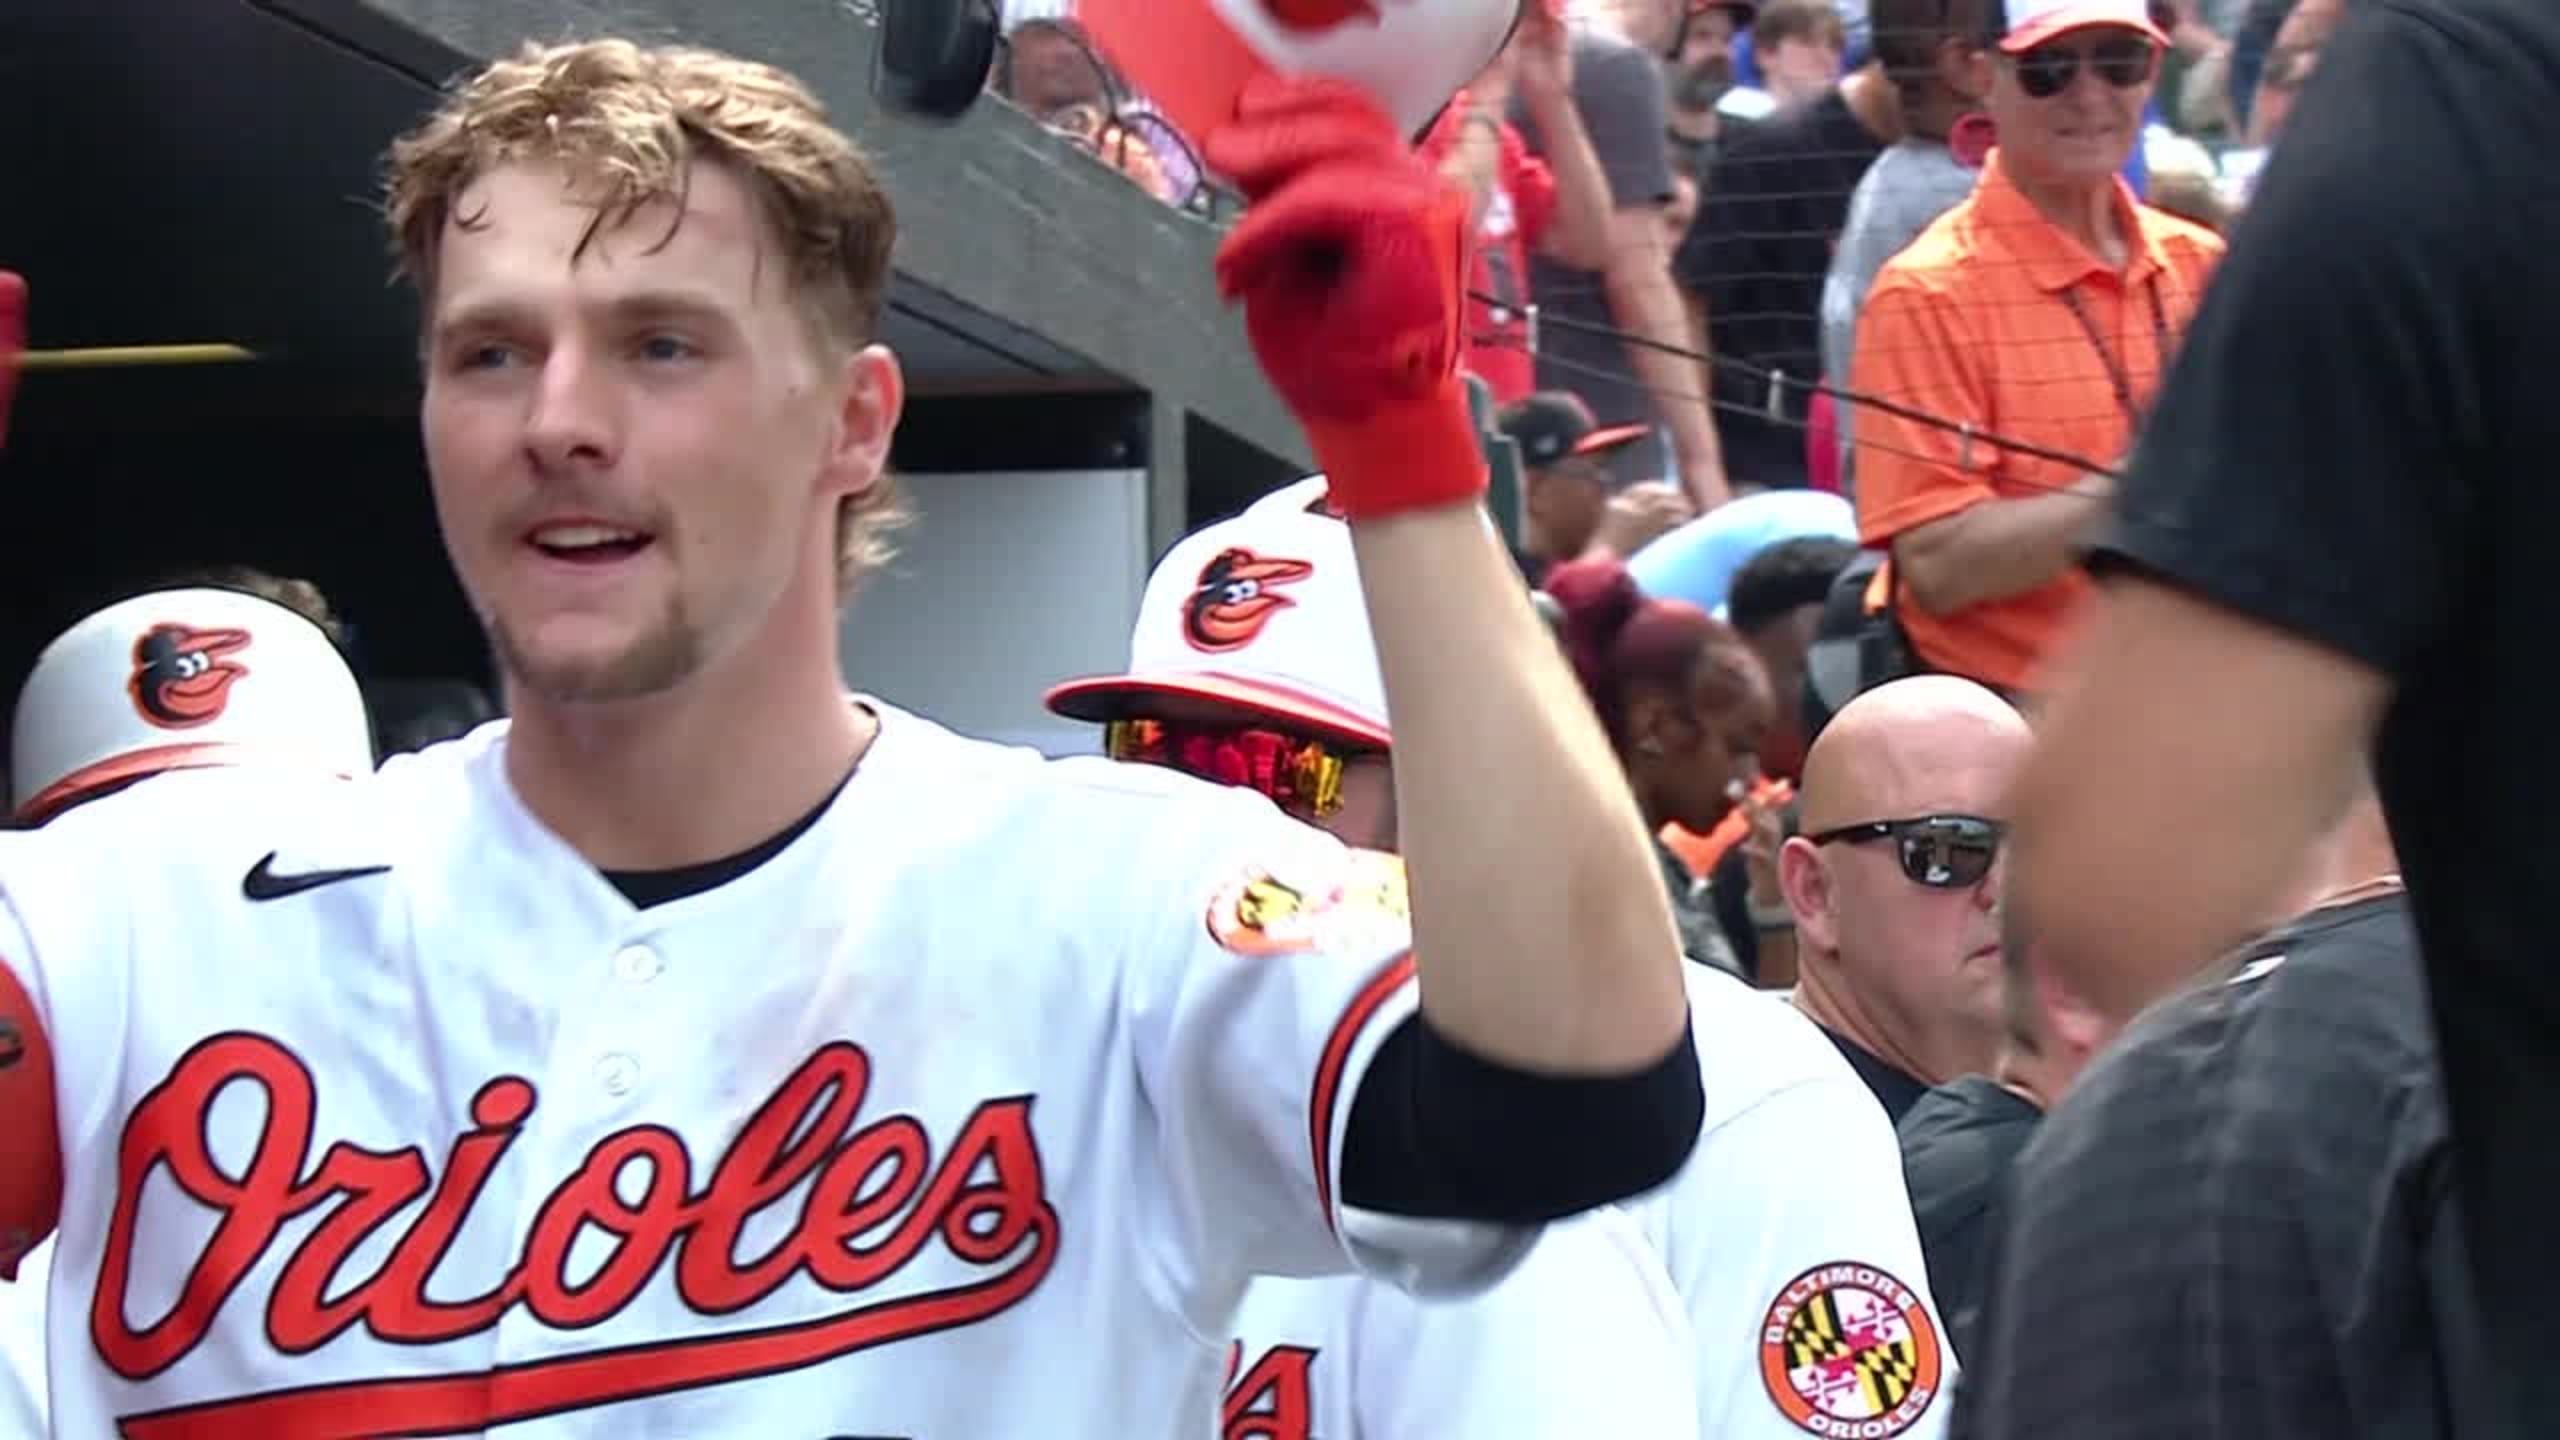 One year of Gunnar Henderson: Ranking the 10 best moments from the Orioles'  star infielder